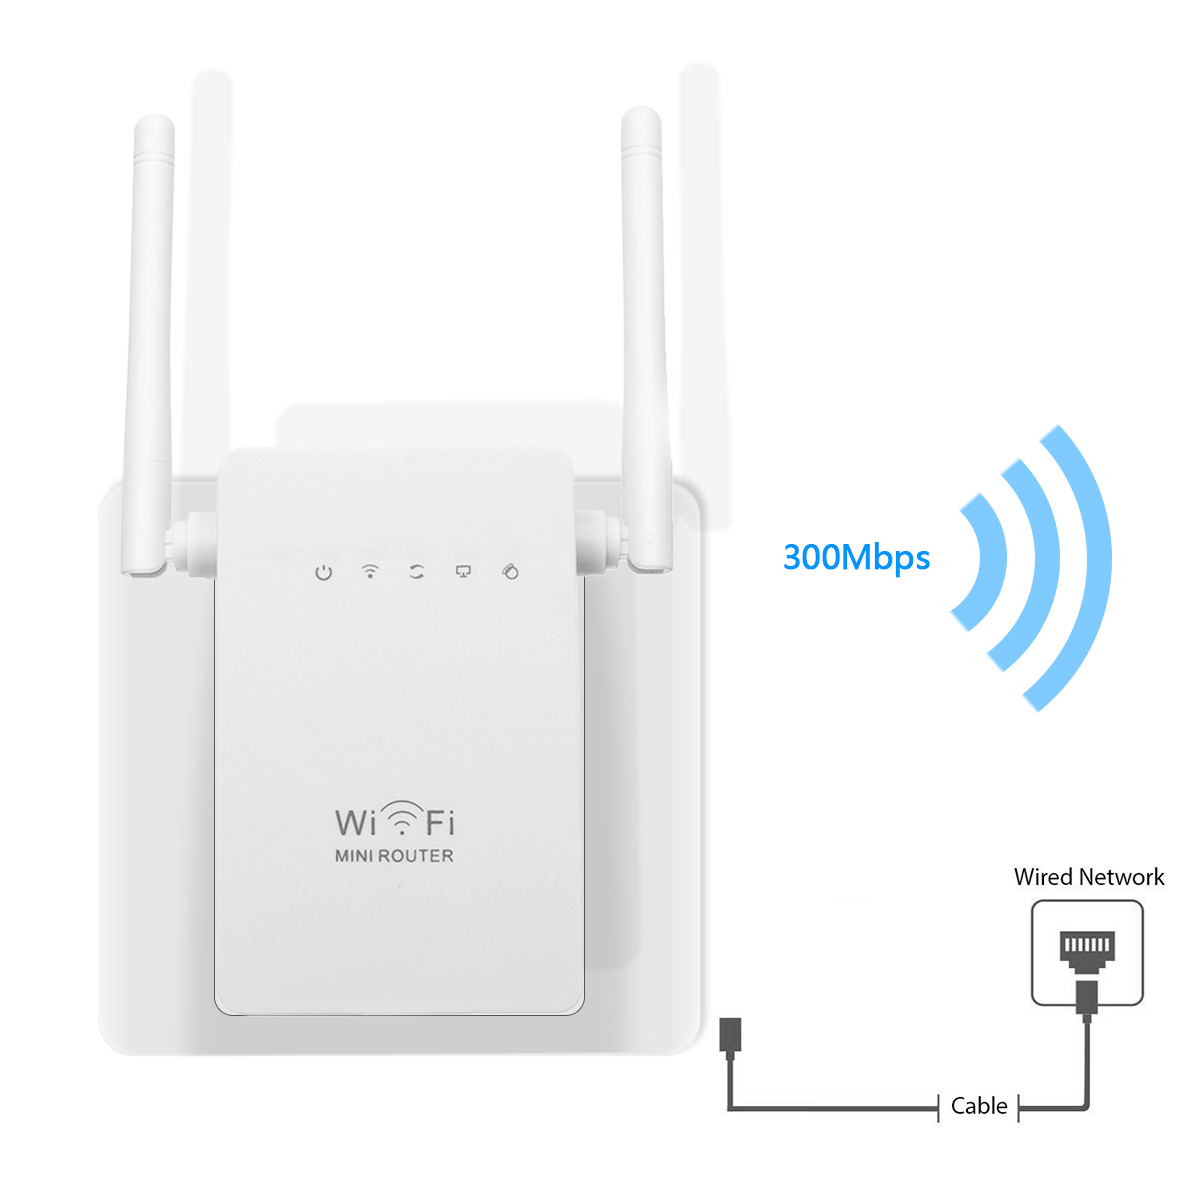 300Mbps-Wireless-Wifi-Range-Repeater-Booster-80211-Dual-Antennas-Wireless-AP-Router-with-LAN-WAN-Por-1257437-9